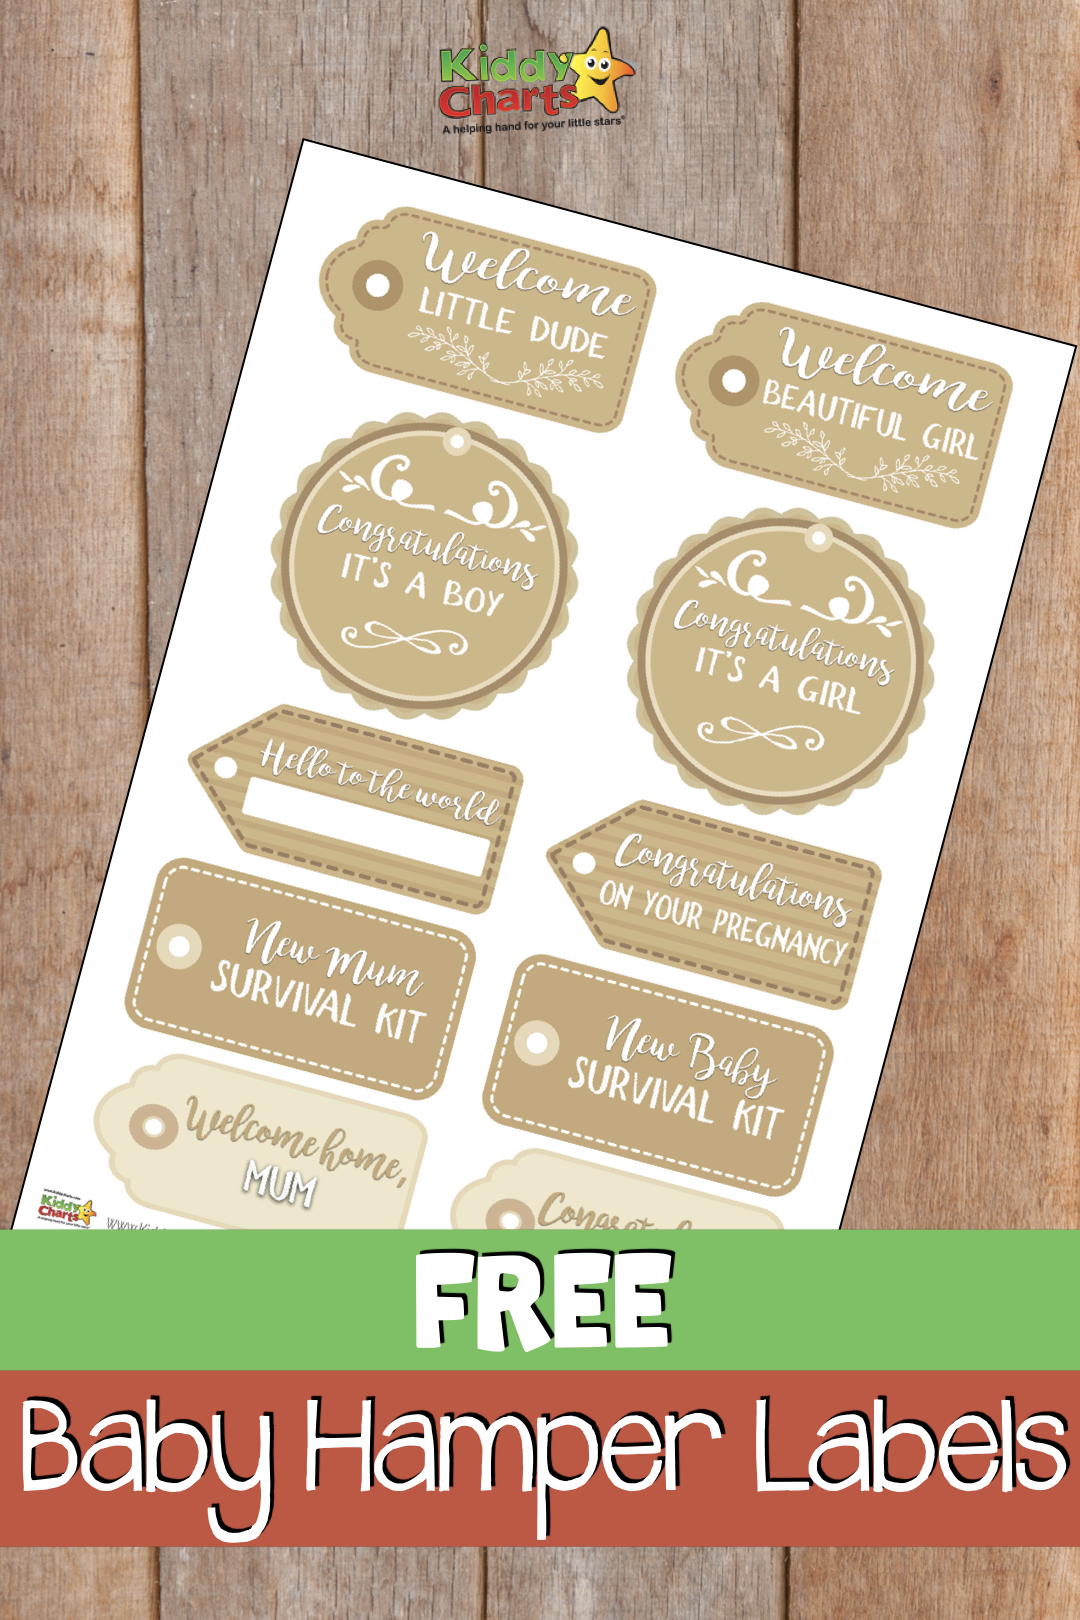 Are you looking for baby gifts? Do you want to give a baby hamper to a friend or spouse? We've got some fabulous free baby hamper labels to add to your hampers for free now - why not check them out? #babygifts #newbaby #babyhampers #baby